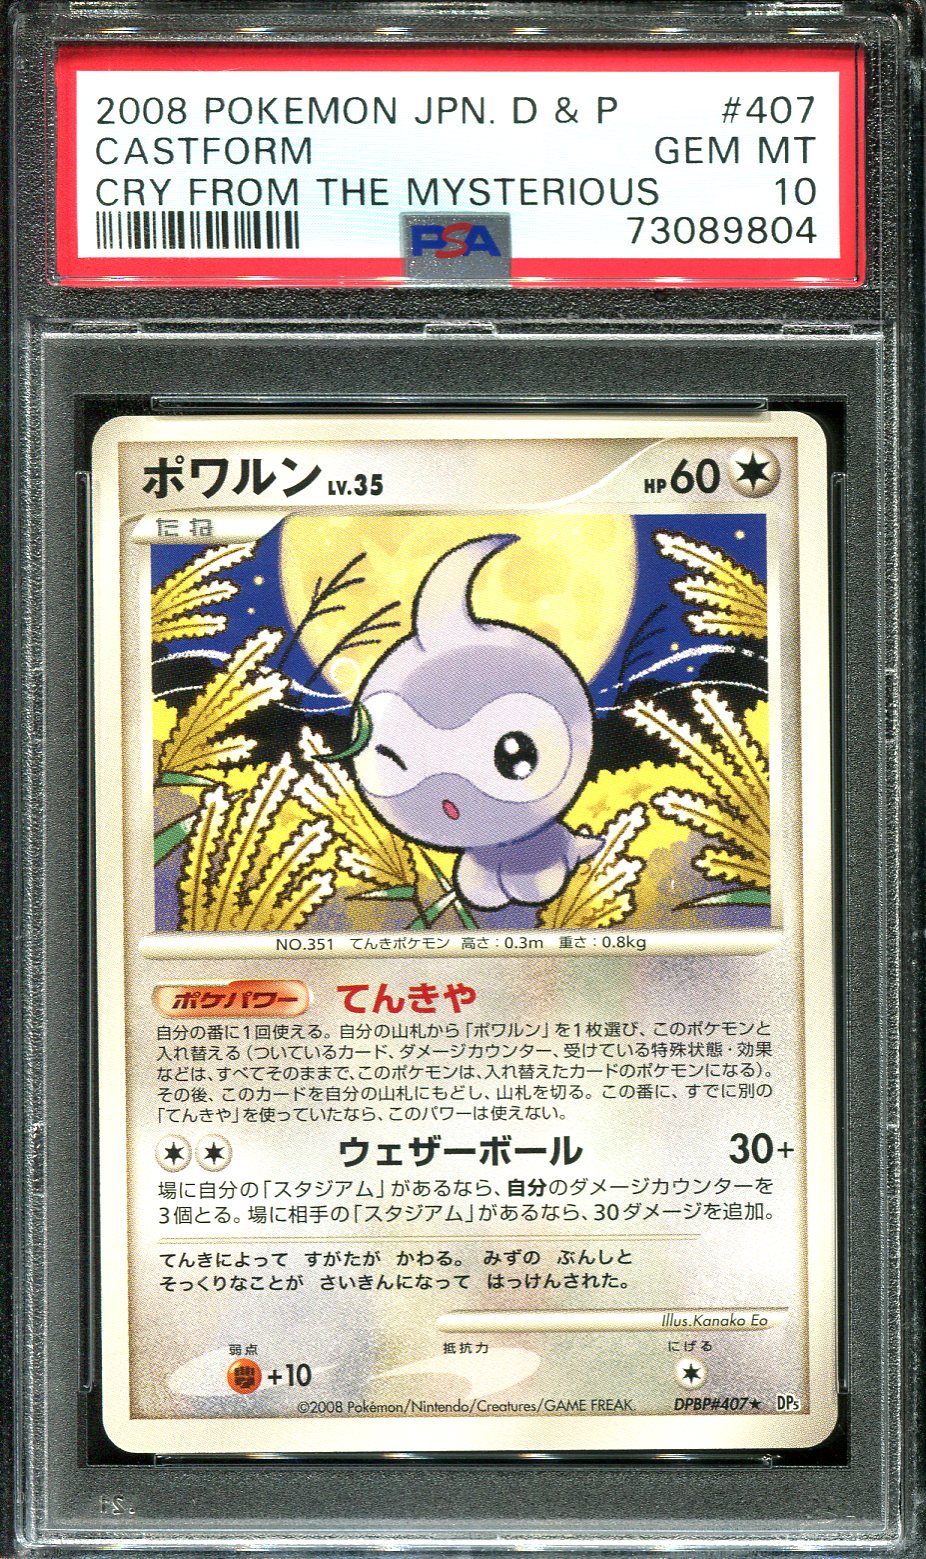 CASTFORM 407 PSA 10 POKEMON CRY FROM THE MYSTERIOUS JAPANESE